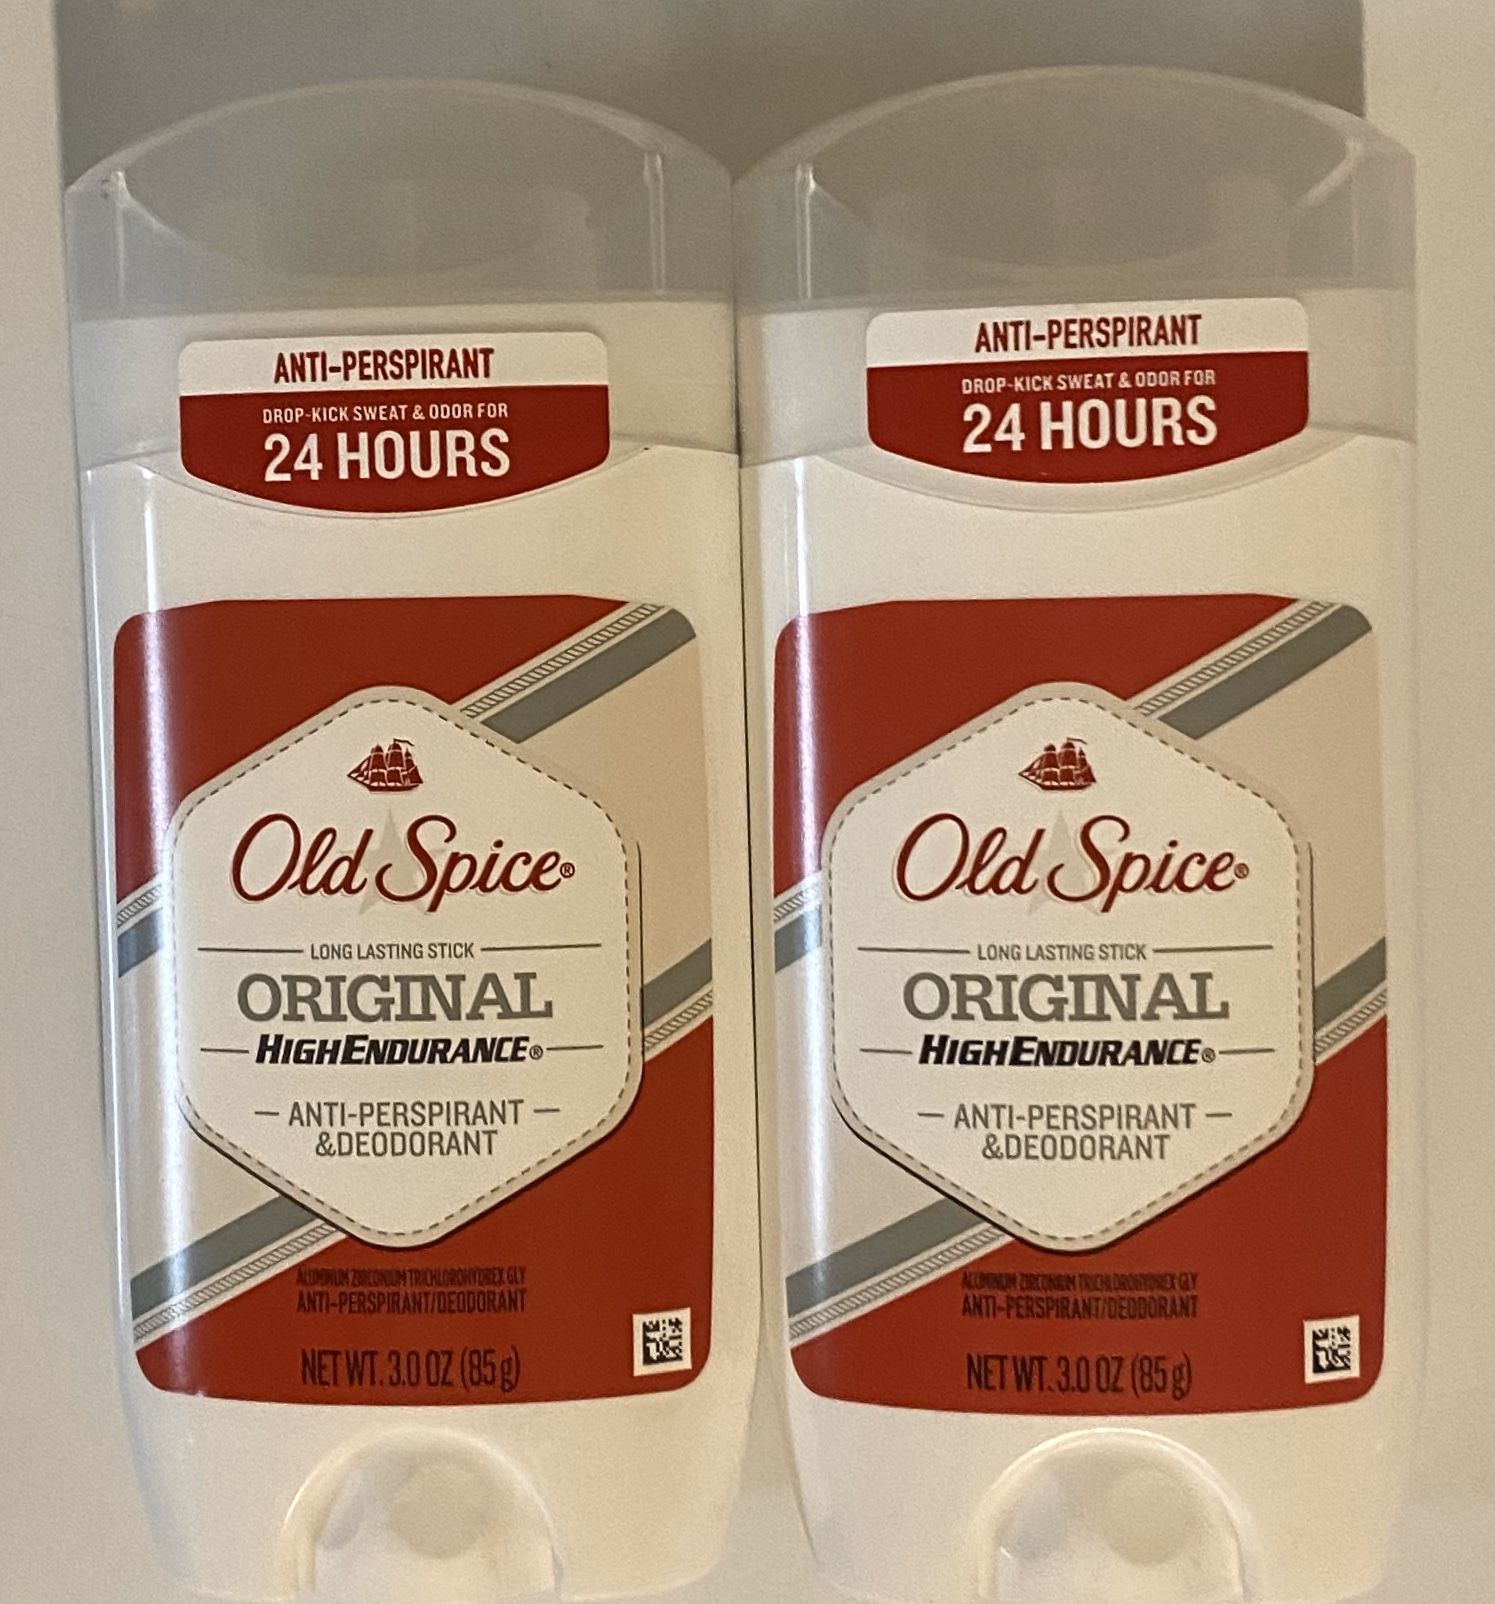 Old Spice $5 for both!